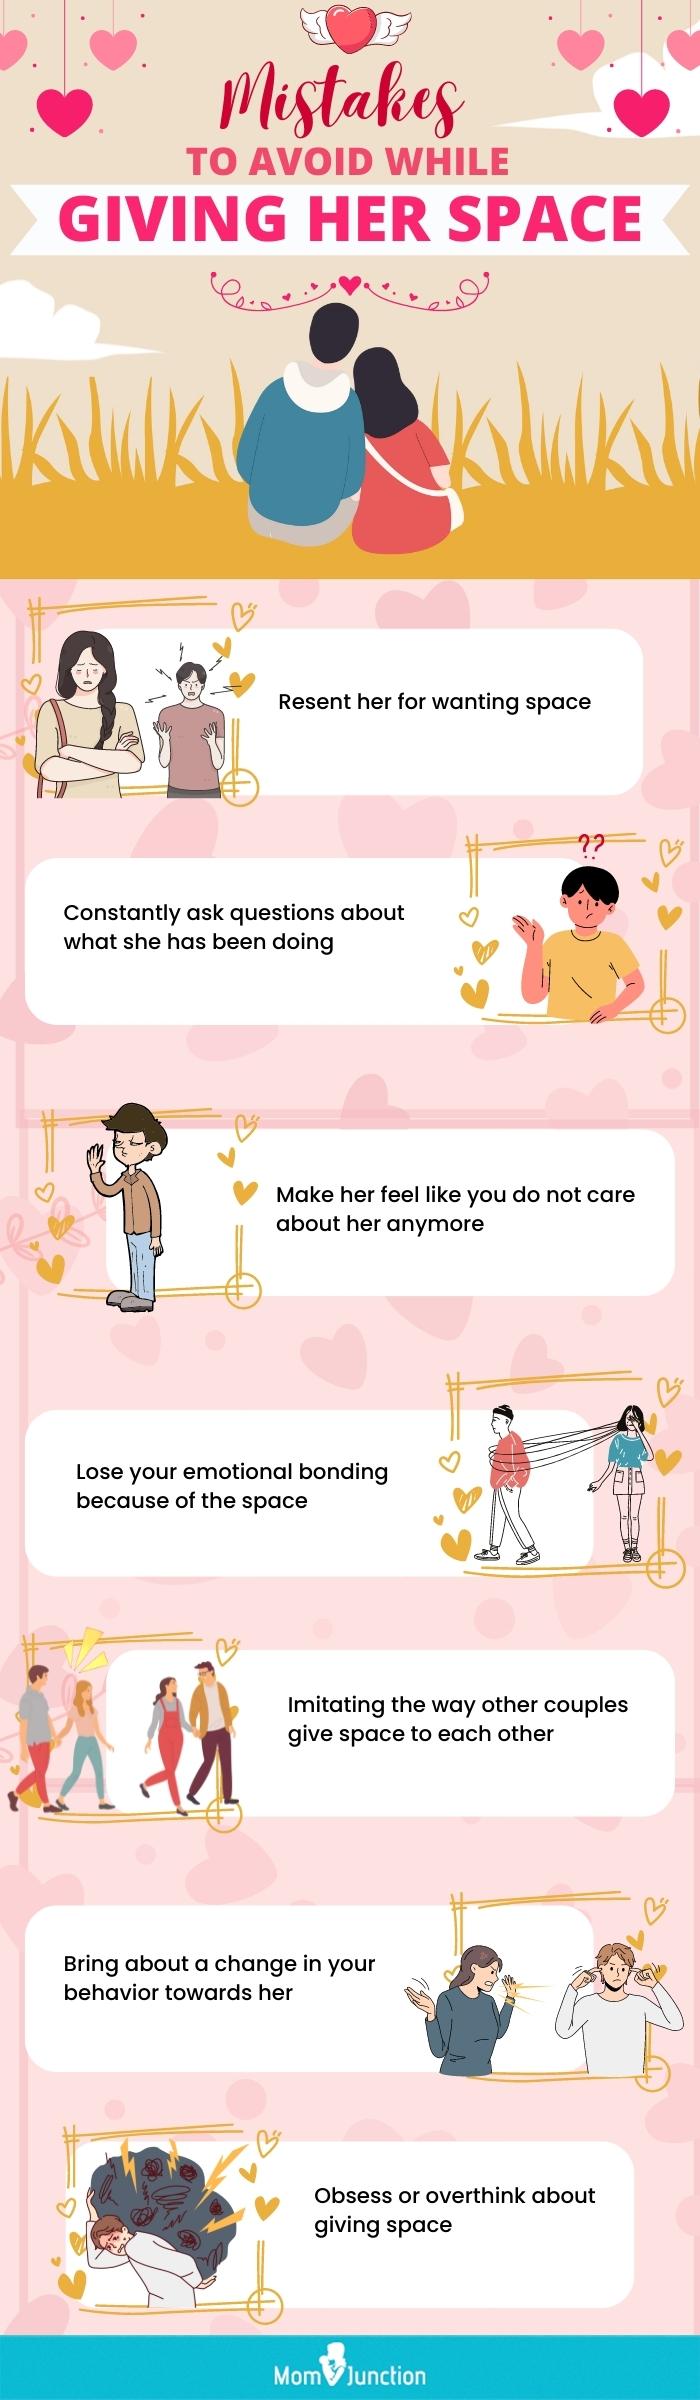 mistakes to avoid while giving her space [infographic]